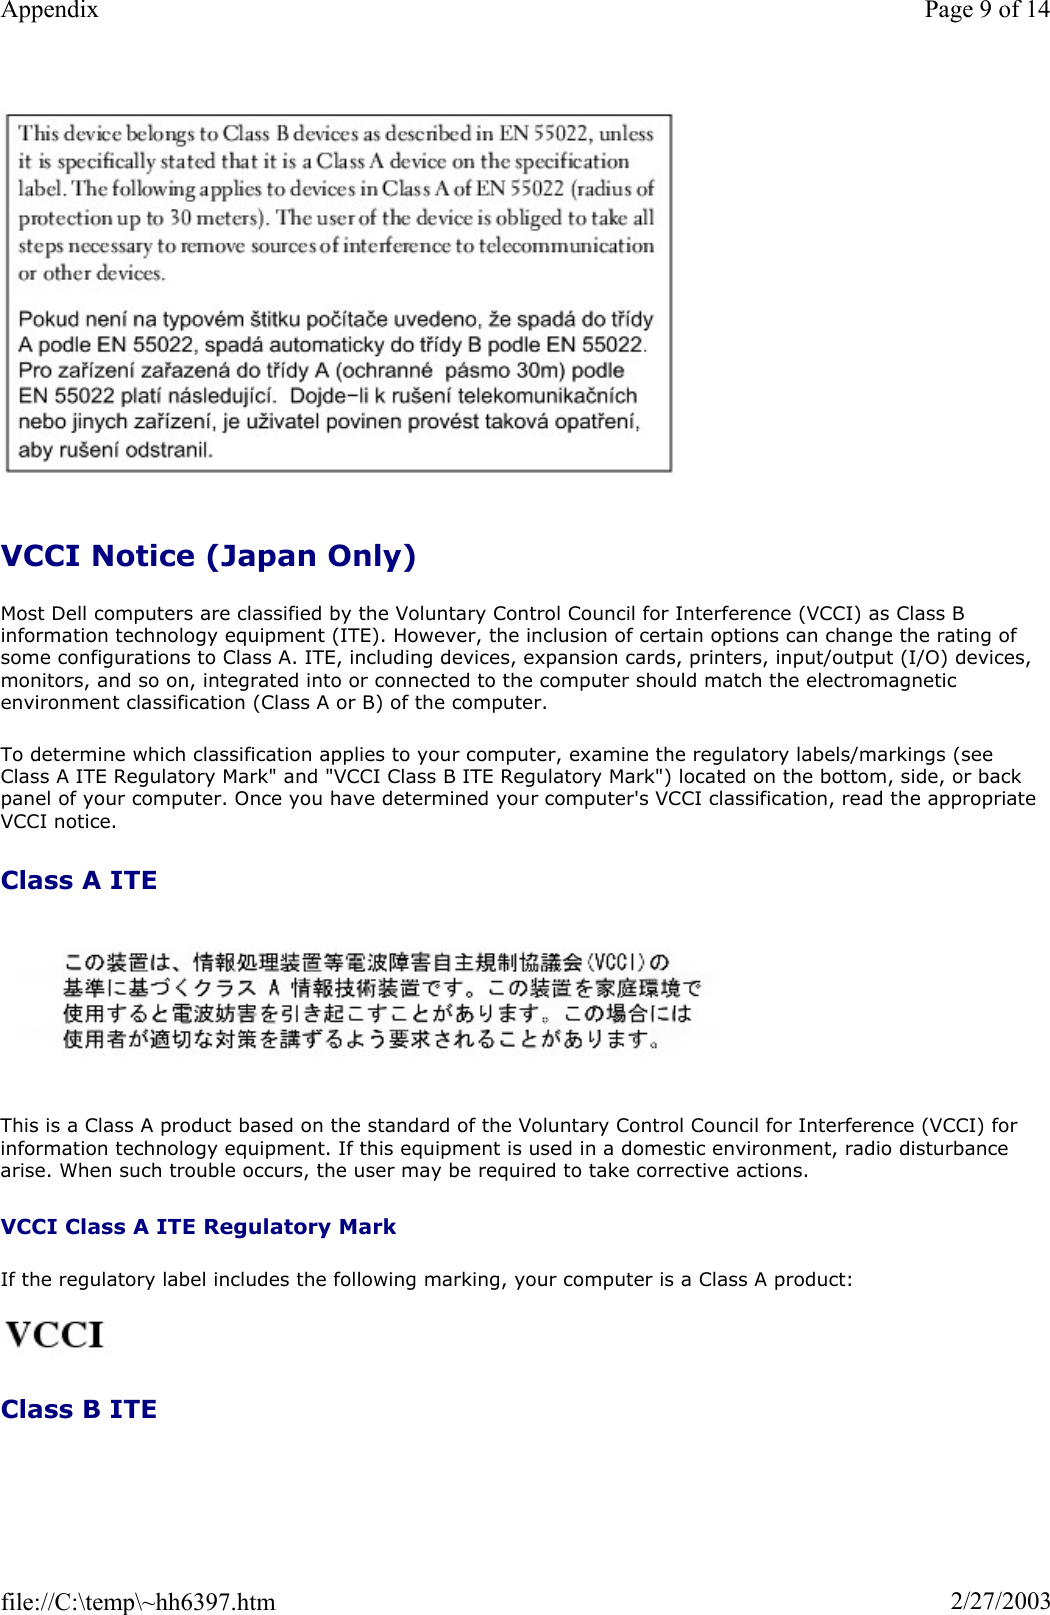 VCCI Notice (Japan Only) Most Dell computers are classified by the Voluntary Control Council for Interference (VCCI) as Class B information technology equipment (ITE). However, the inclusion of certain options can change the rating of some configurations to Class A. ITE, including devices, expansion cards, printers, input/output (I/O) devices, monitors, and so on, integrated into or connected to the computer should match the electromagnetic environment classification (Class A or B) of the computer. To determine which classification applies to your computer, examine the regulatory labels/markings (see Class A ITE Regulatory Mark&quot; and &quot;VCCI Class B ITE Regulatory Mark&quot;) located on the bottom, side, or back panel of your computer. Once you have determined your computer&apos;s VCCI classification, read the appropriate VCCI notice. Class A ITE This is a Class A product based on the standard of the Voluntary Control Council for Interference (VCCI) for information technology equipment. If this equipment is used in a domestic environment, radio disturbance arise. When such trouble occurs, the user may be required to take corrective actions. VCCI Class A ITE Regulatory MarkIf the regulatory label includes the following marking, your computer is a Class A product:  Class B ITE Page 9 of 14Appendix2/27/2003file://C:\temp\~hh6397.htm